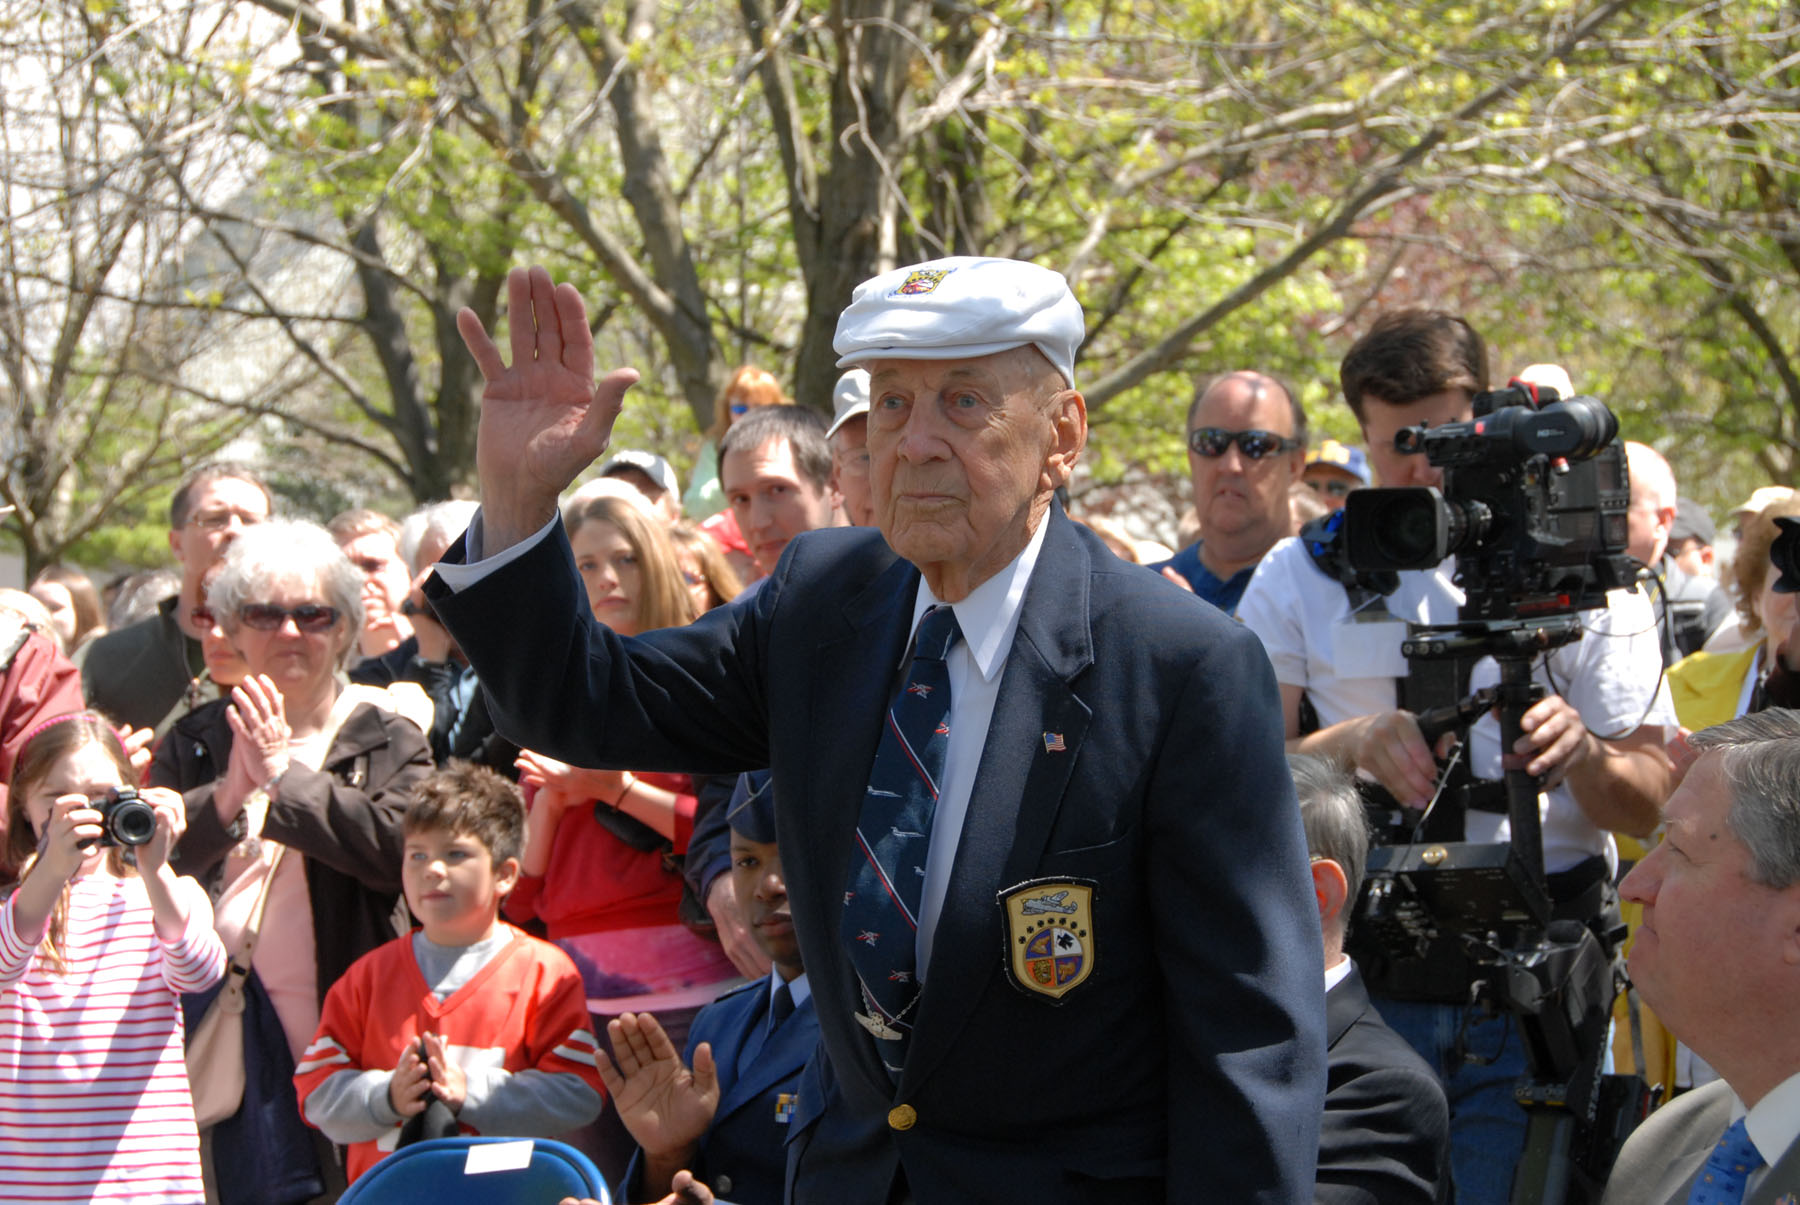 Lt. Col. Richard “Dick” E. Cole, who served as Jimmy Doolittle’s co-pilot on Crew No. 1. Cole, now 101 years old, plans to return to the National Museum of the U.S. Air Force in April to commemorate the 75th anniversary of the raid. (U.S. Air Force photo by Jeff Fisher)